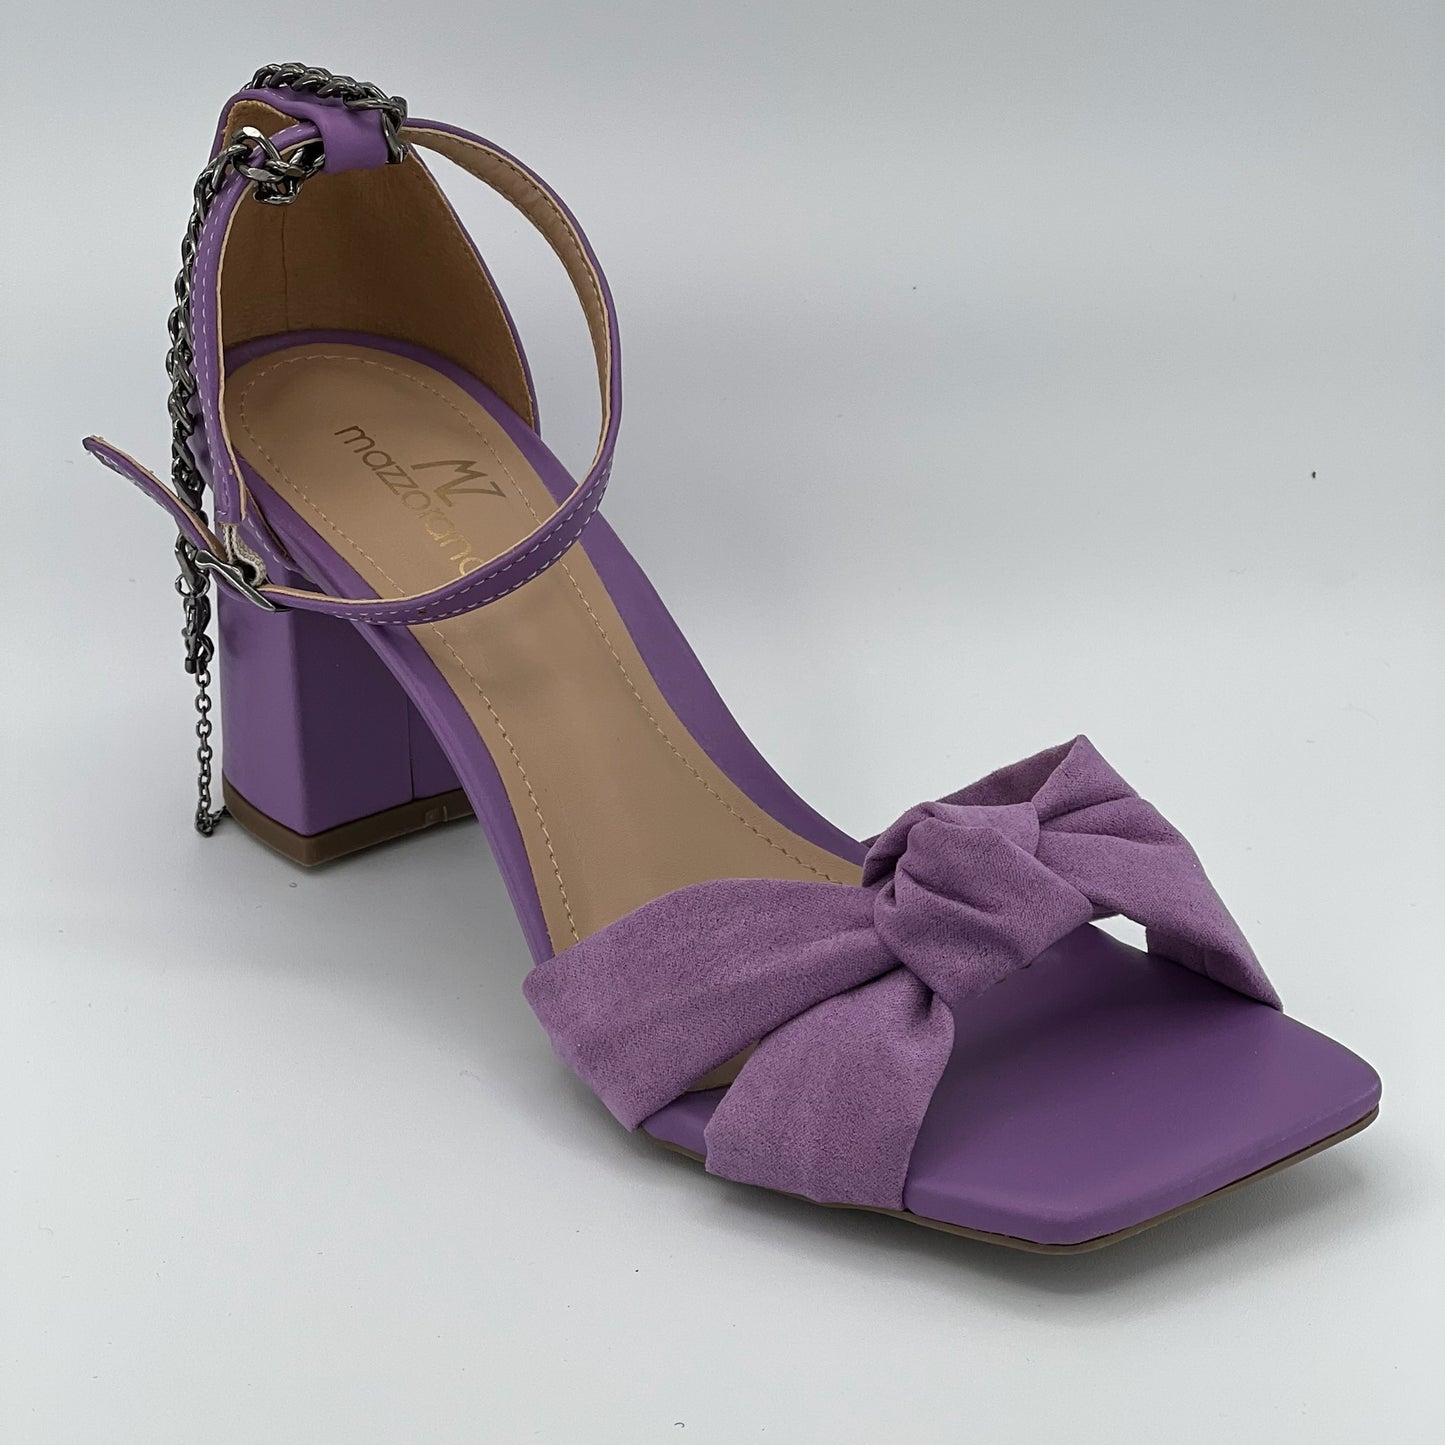 Light purple lavender sandals with chain accent, block hill, closure in the back.. Side view.